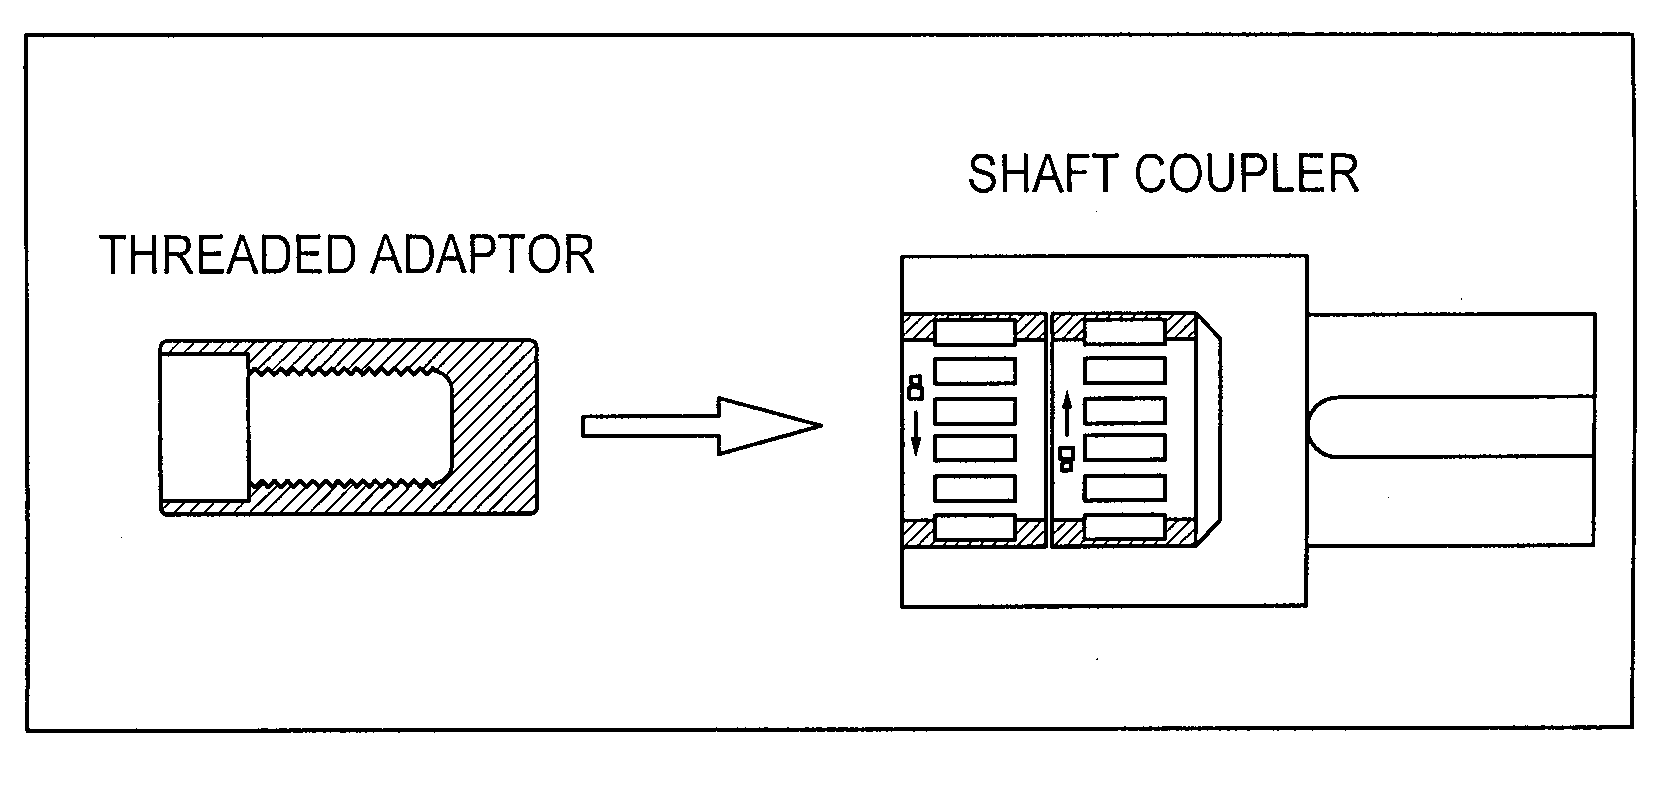 System, Method and Computer Program for Remotely Testing System Components Over A Network